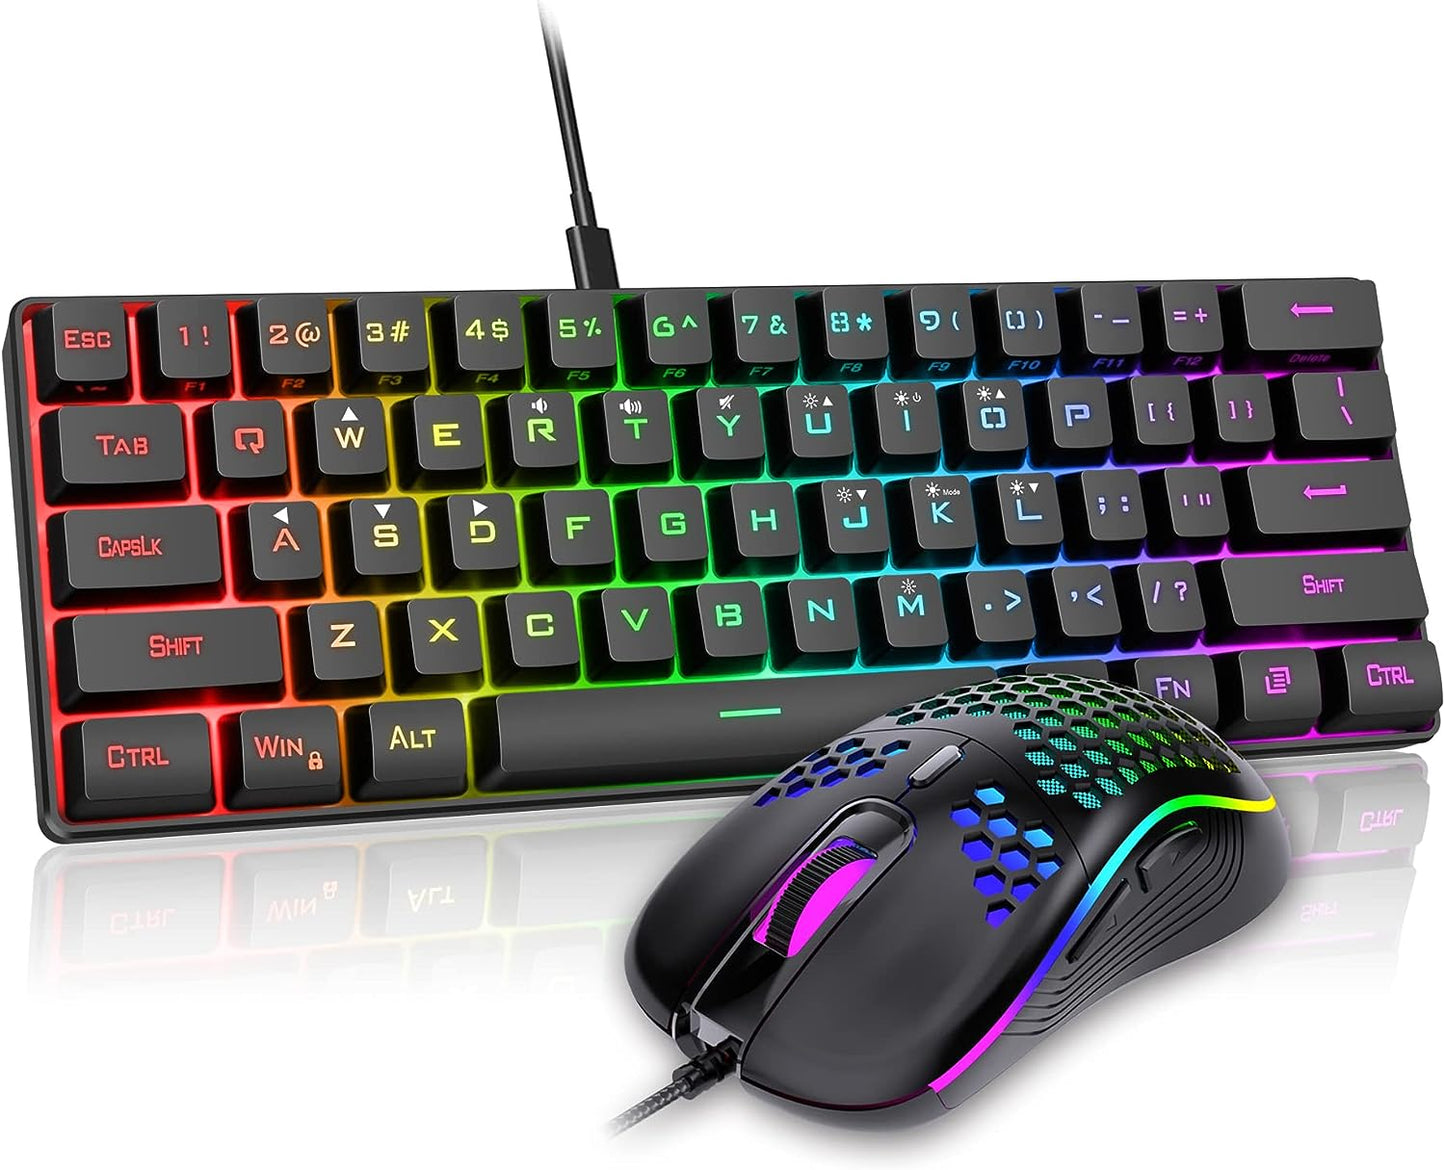 RedThunder 60% Gaming Keyboard and Mouse Combo